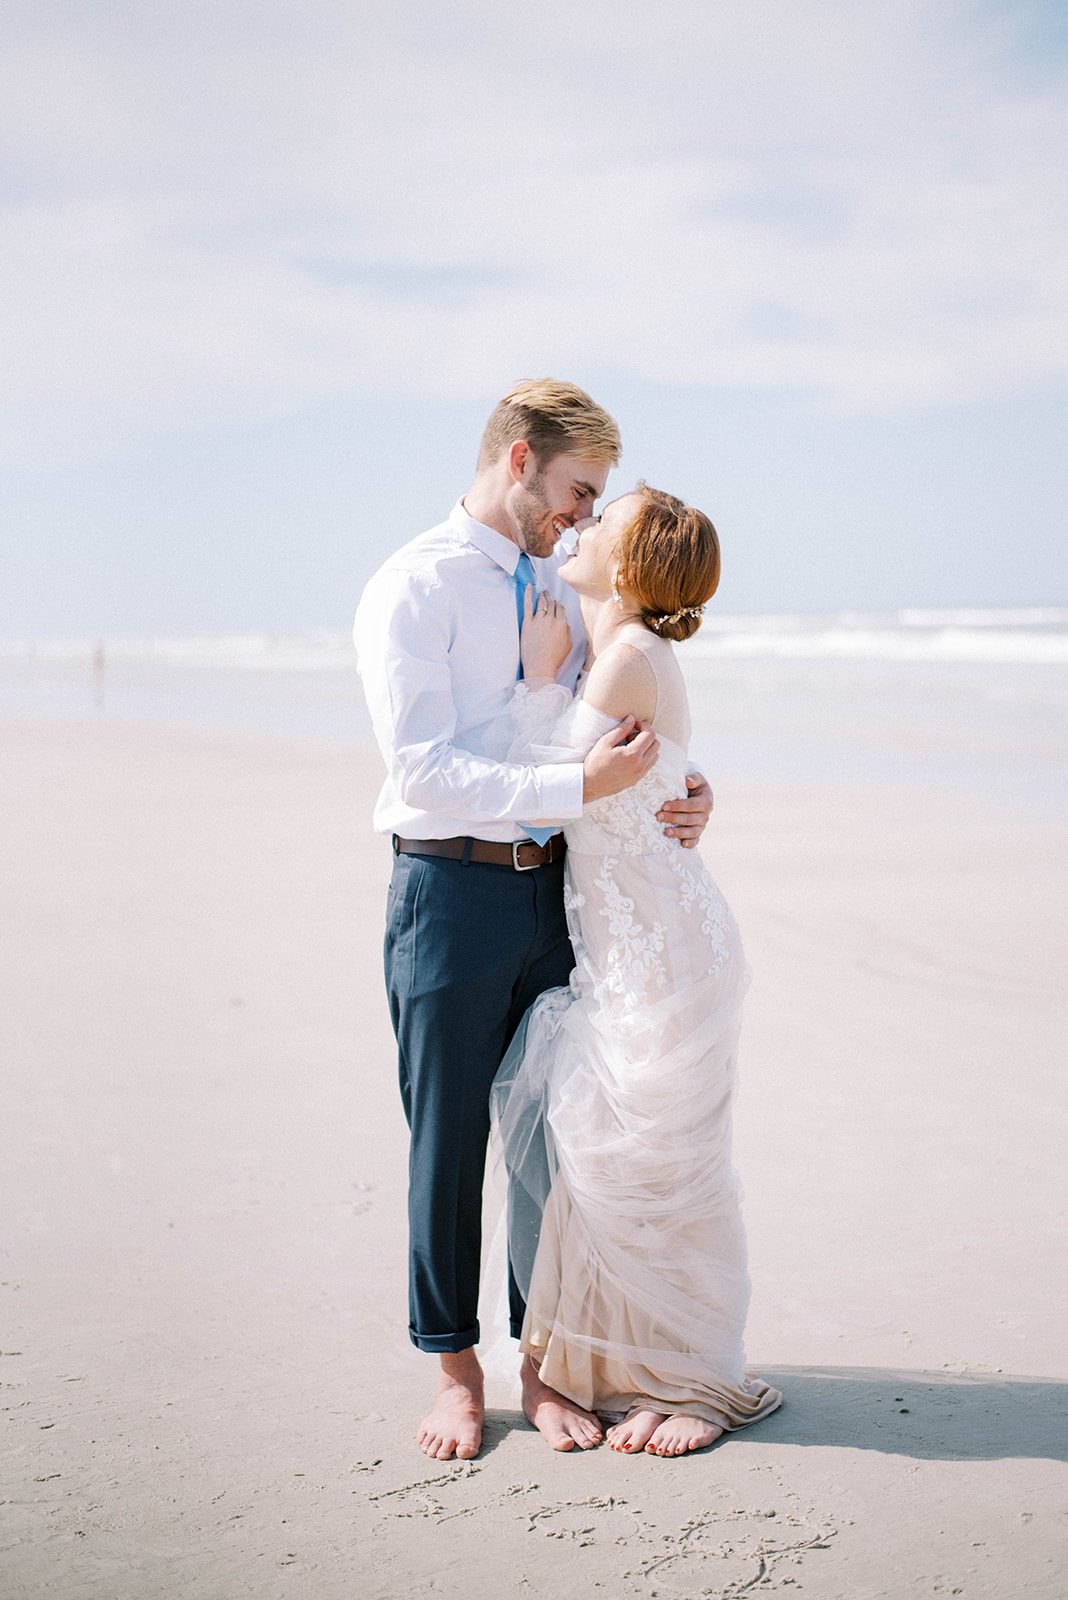 minimalist beach wedding in Florida with bride and groom embracing each other on the New Smyrna Beach